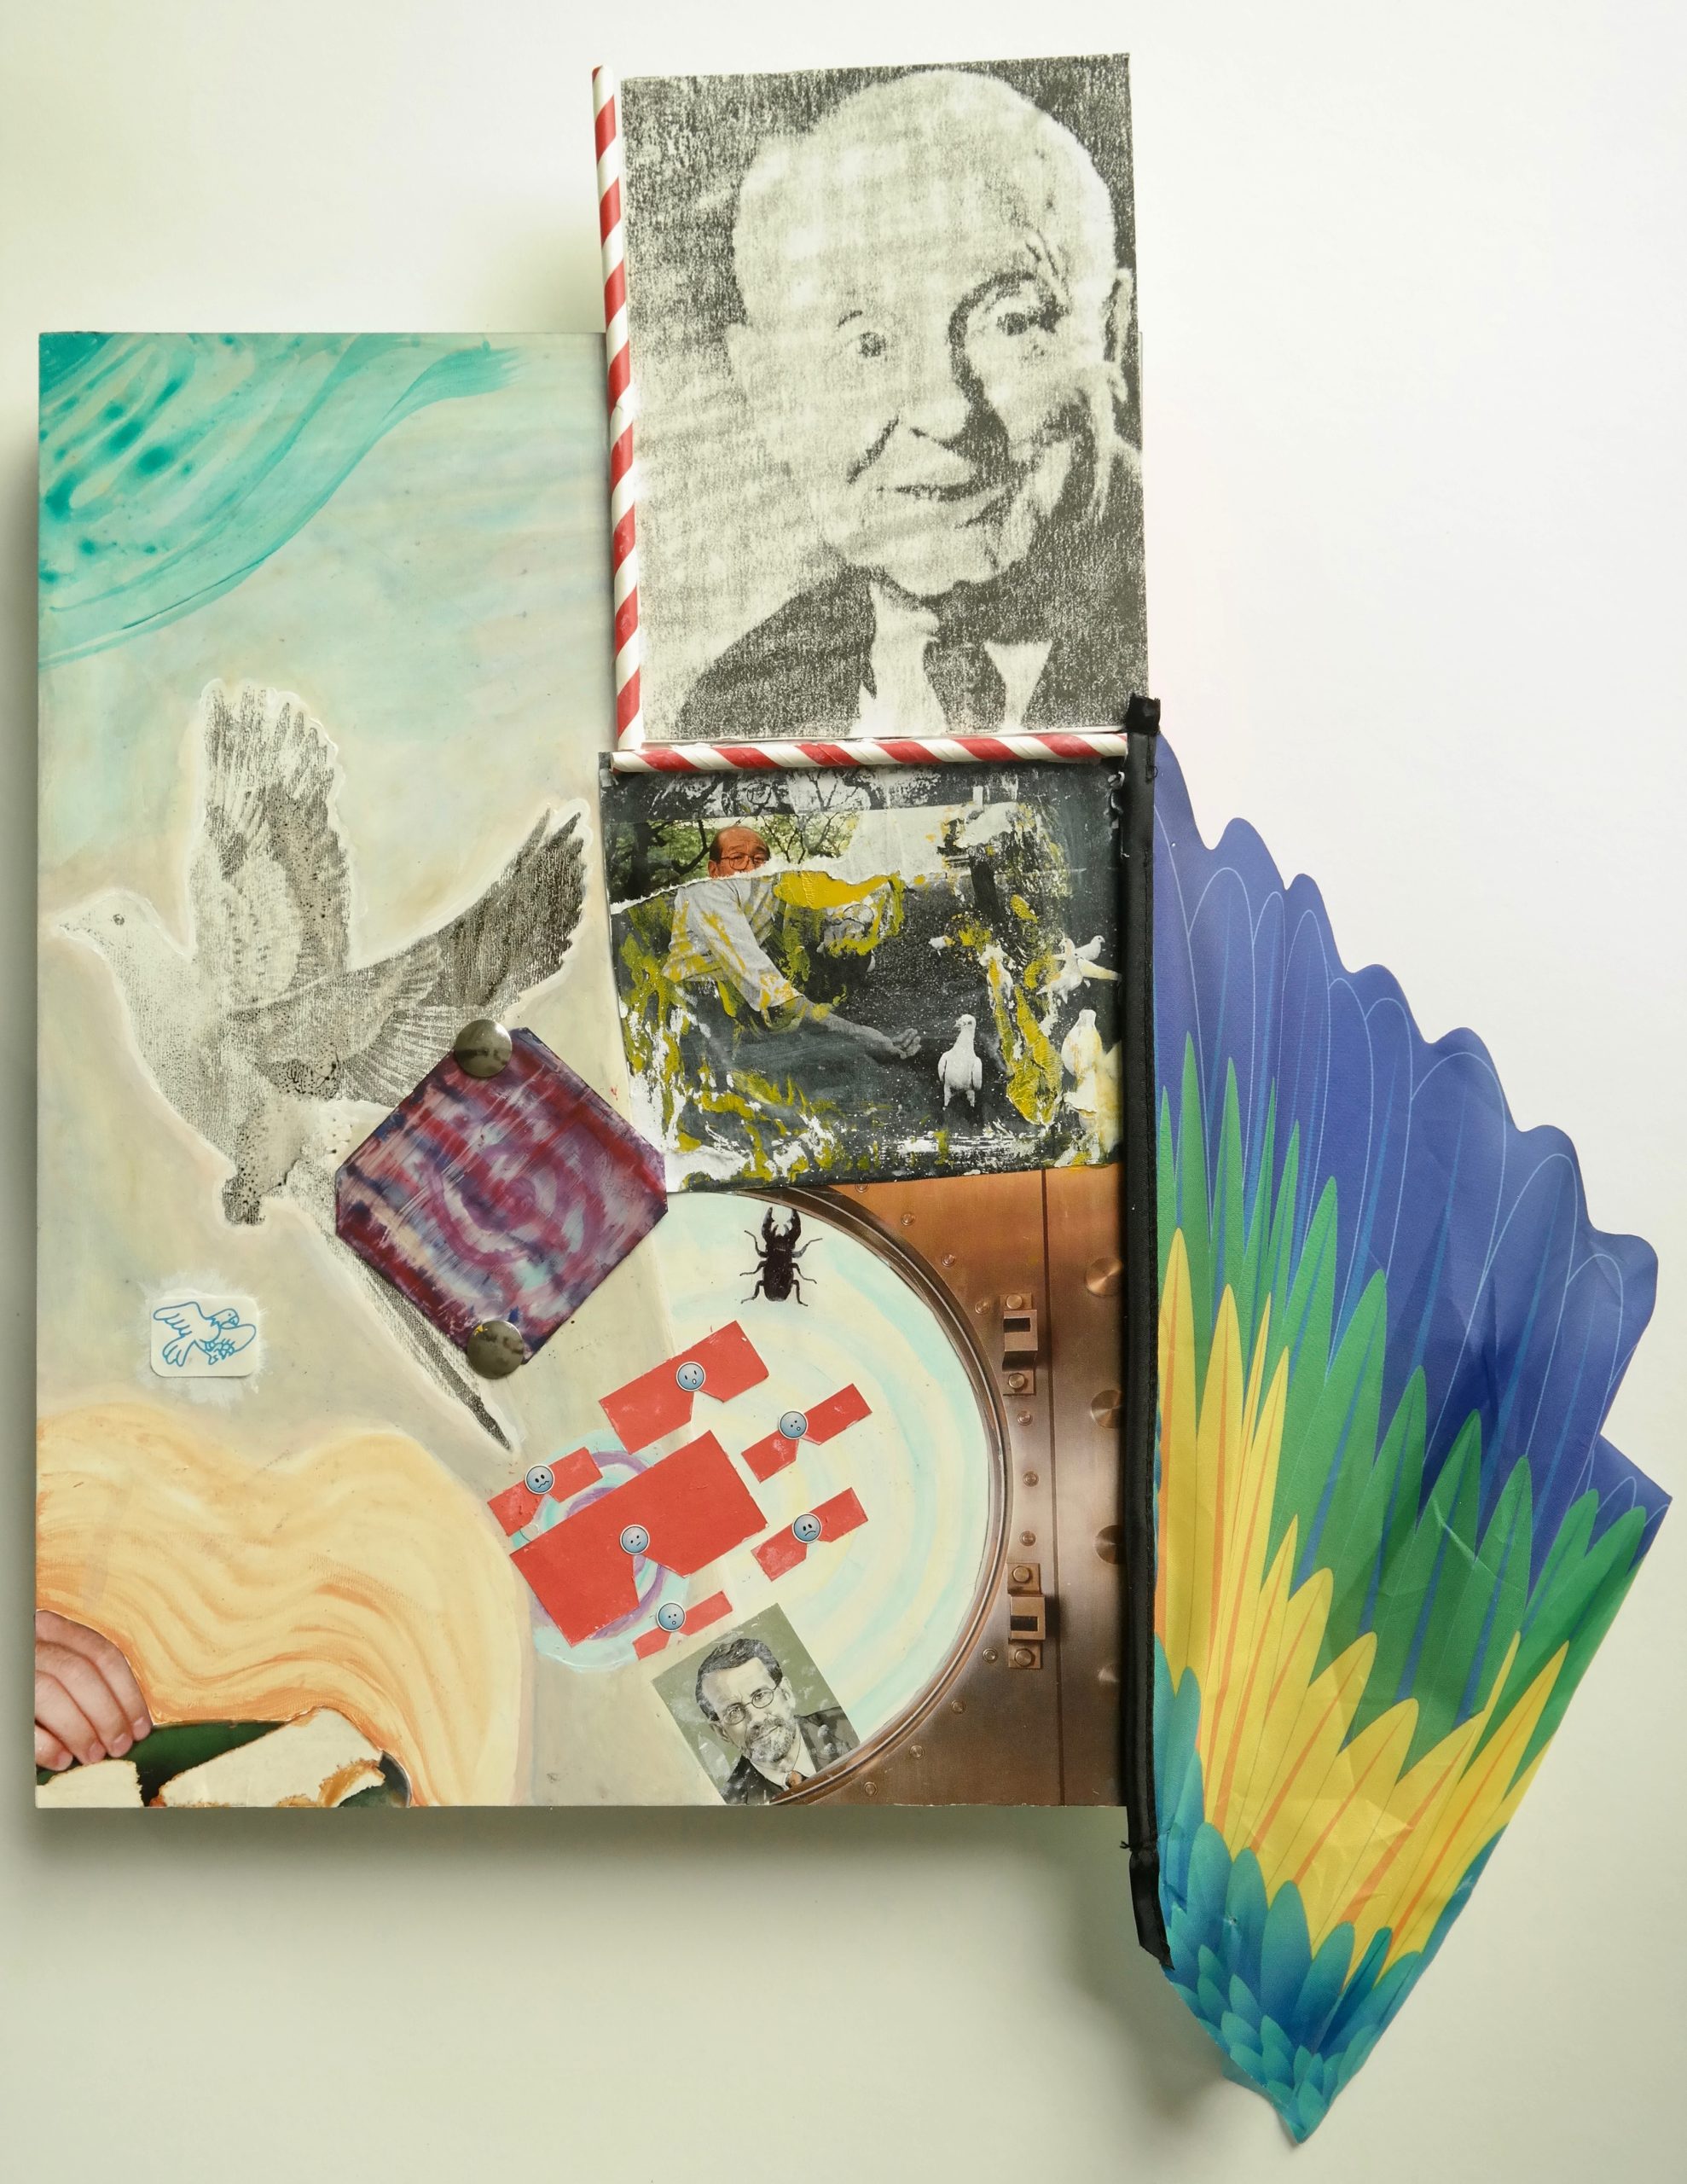 Liam B. ’20, Untitled, acrylic paint, transfers, collage, stickers, thumbtacks, drinking straws, and plastic kite wing on cradled panel, 2018